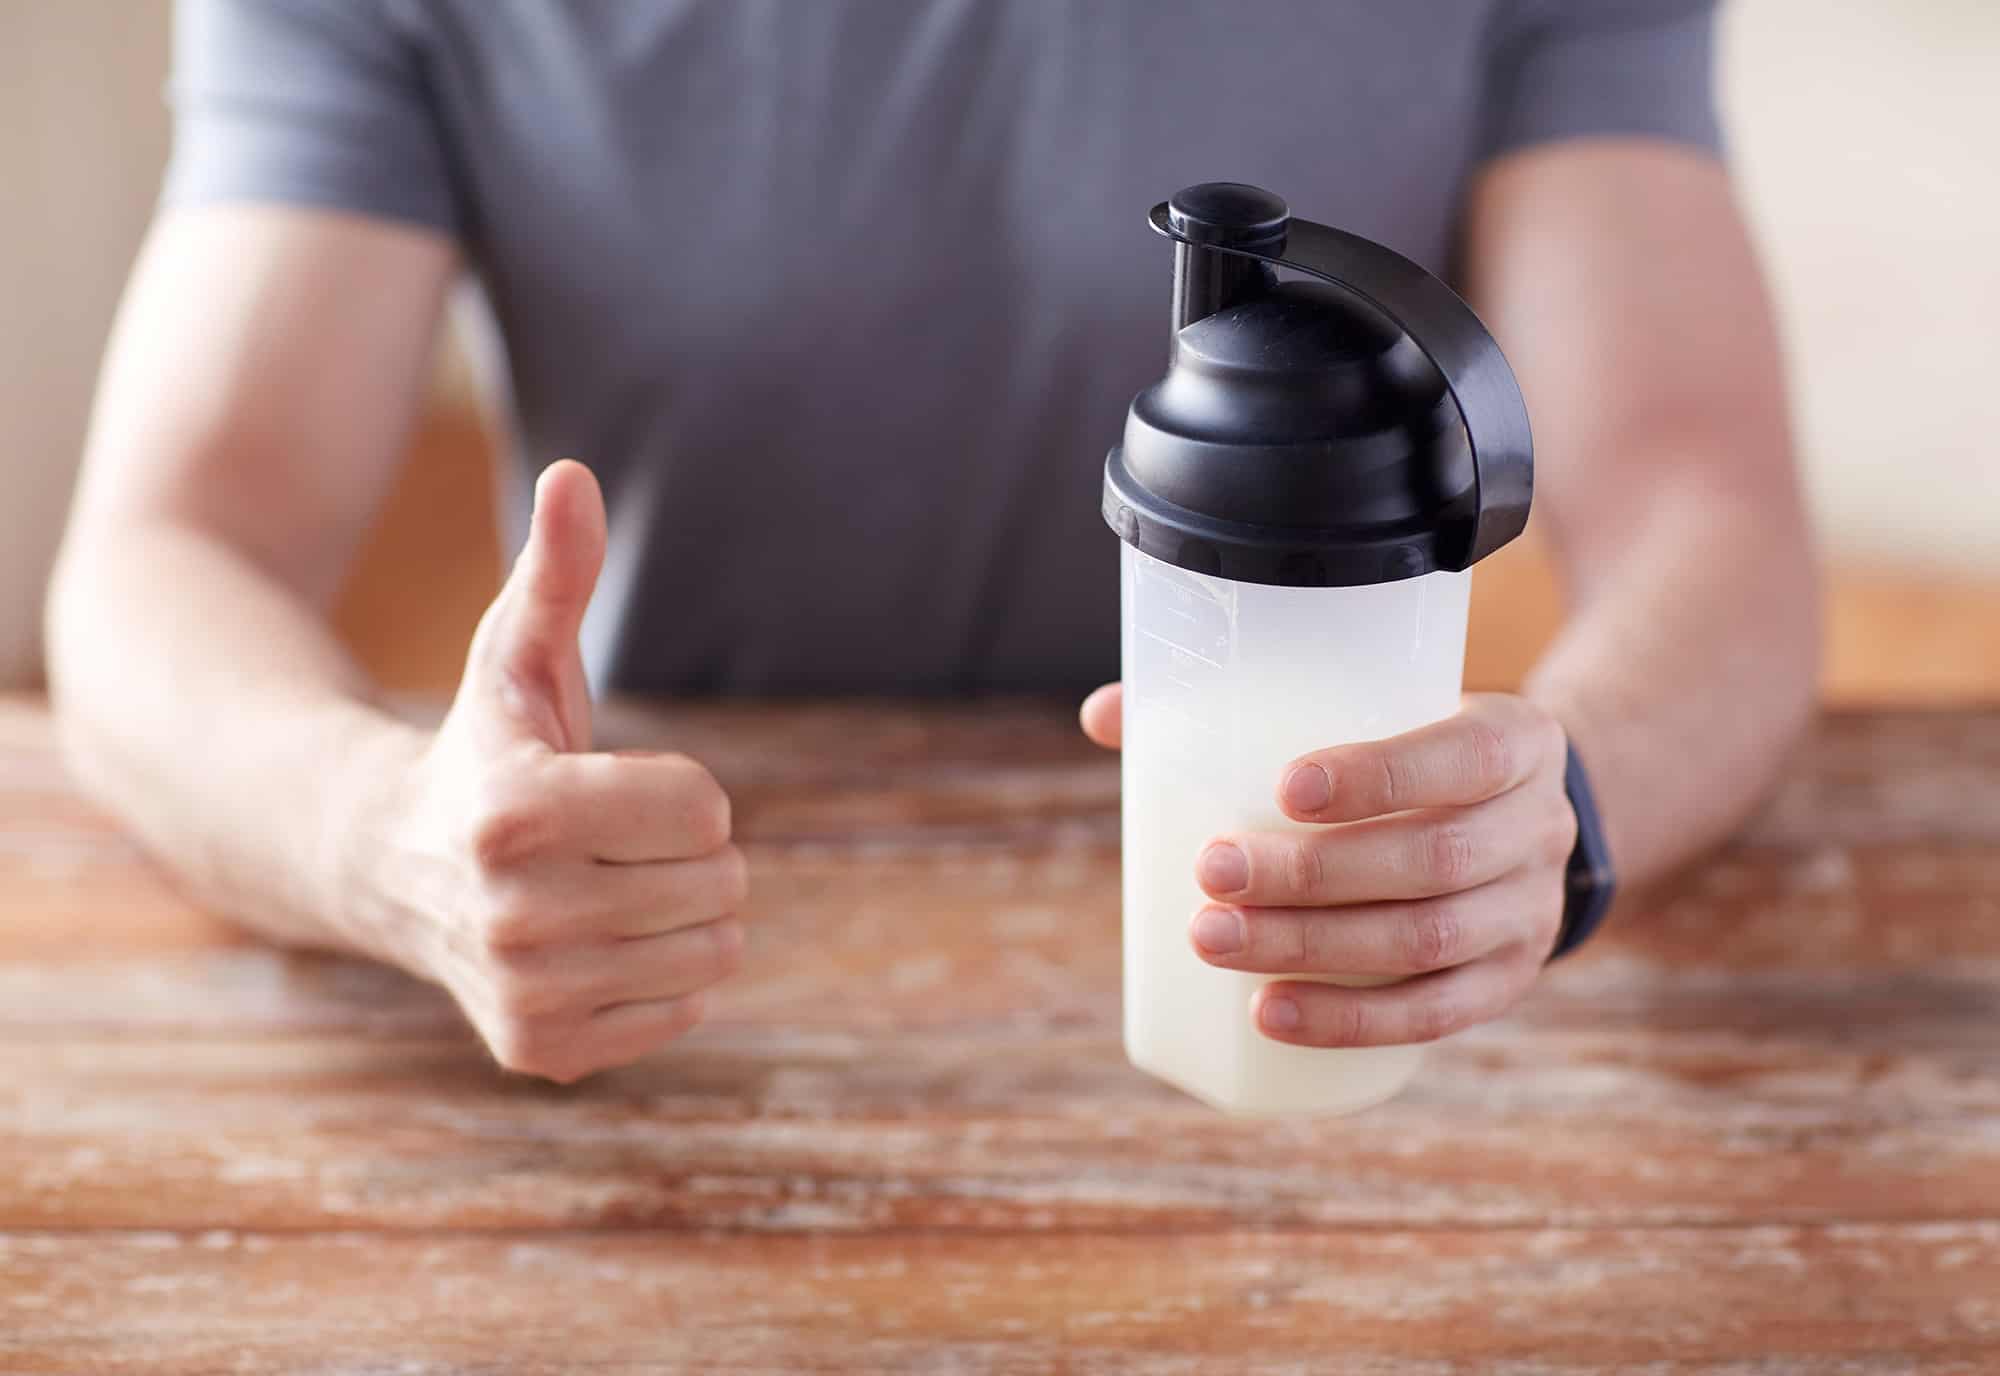 Creatine Cycle: What Is It & Should You Do It?